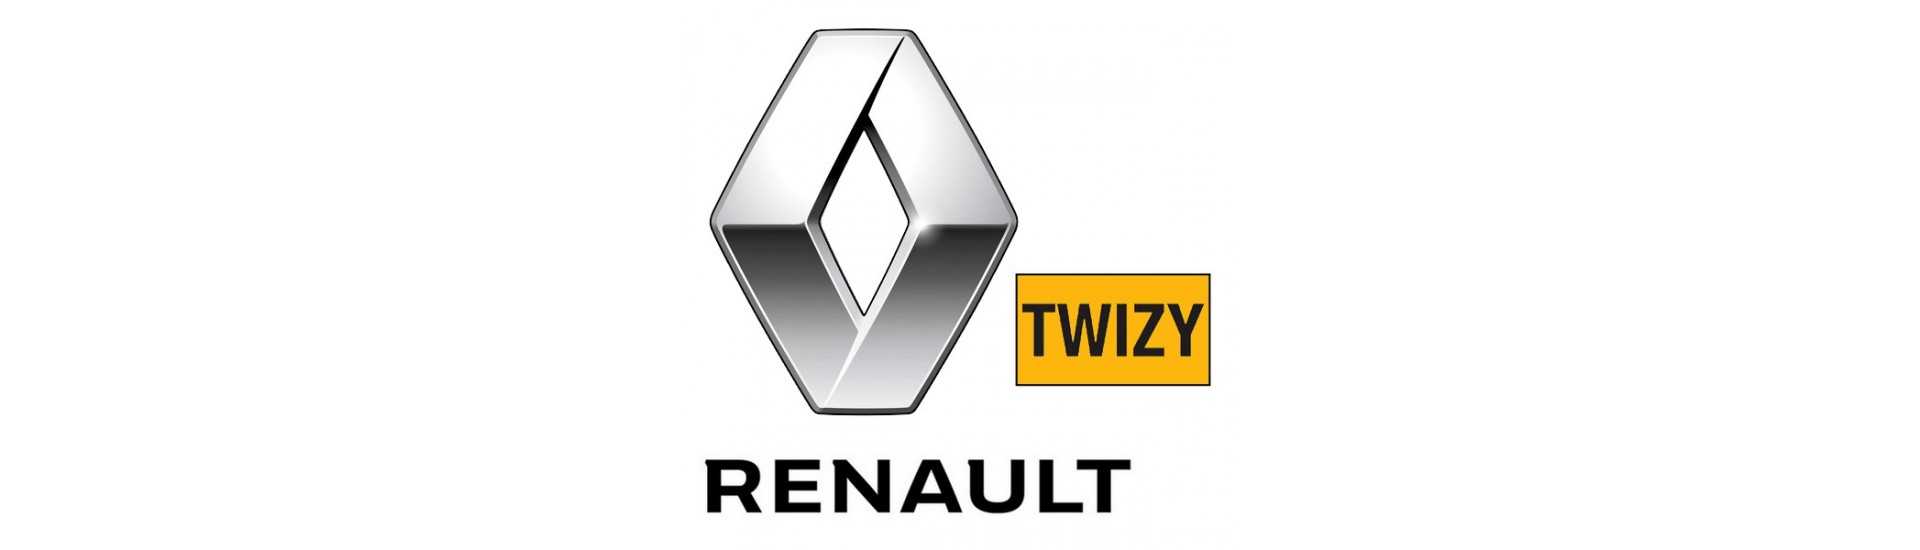 Full moyeu set best car prices without permit Renault Twizy